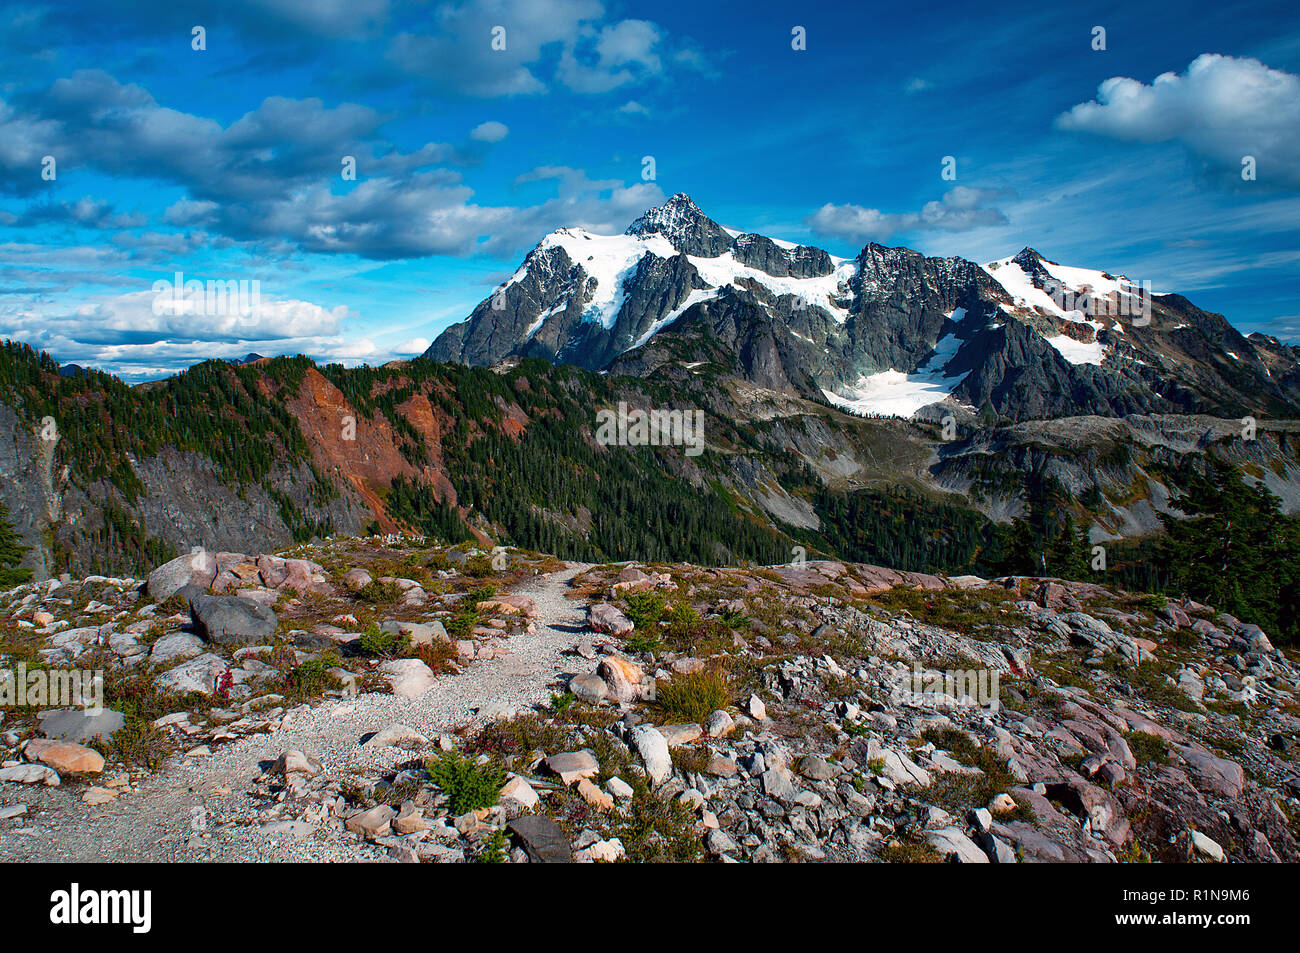 October 2018: The glaciers of Mount Shuksan, Mount Baker Wilderness, Snoqualmie National Forest, Washington, USA. Stock Photo